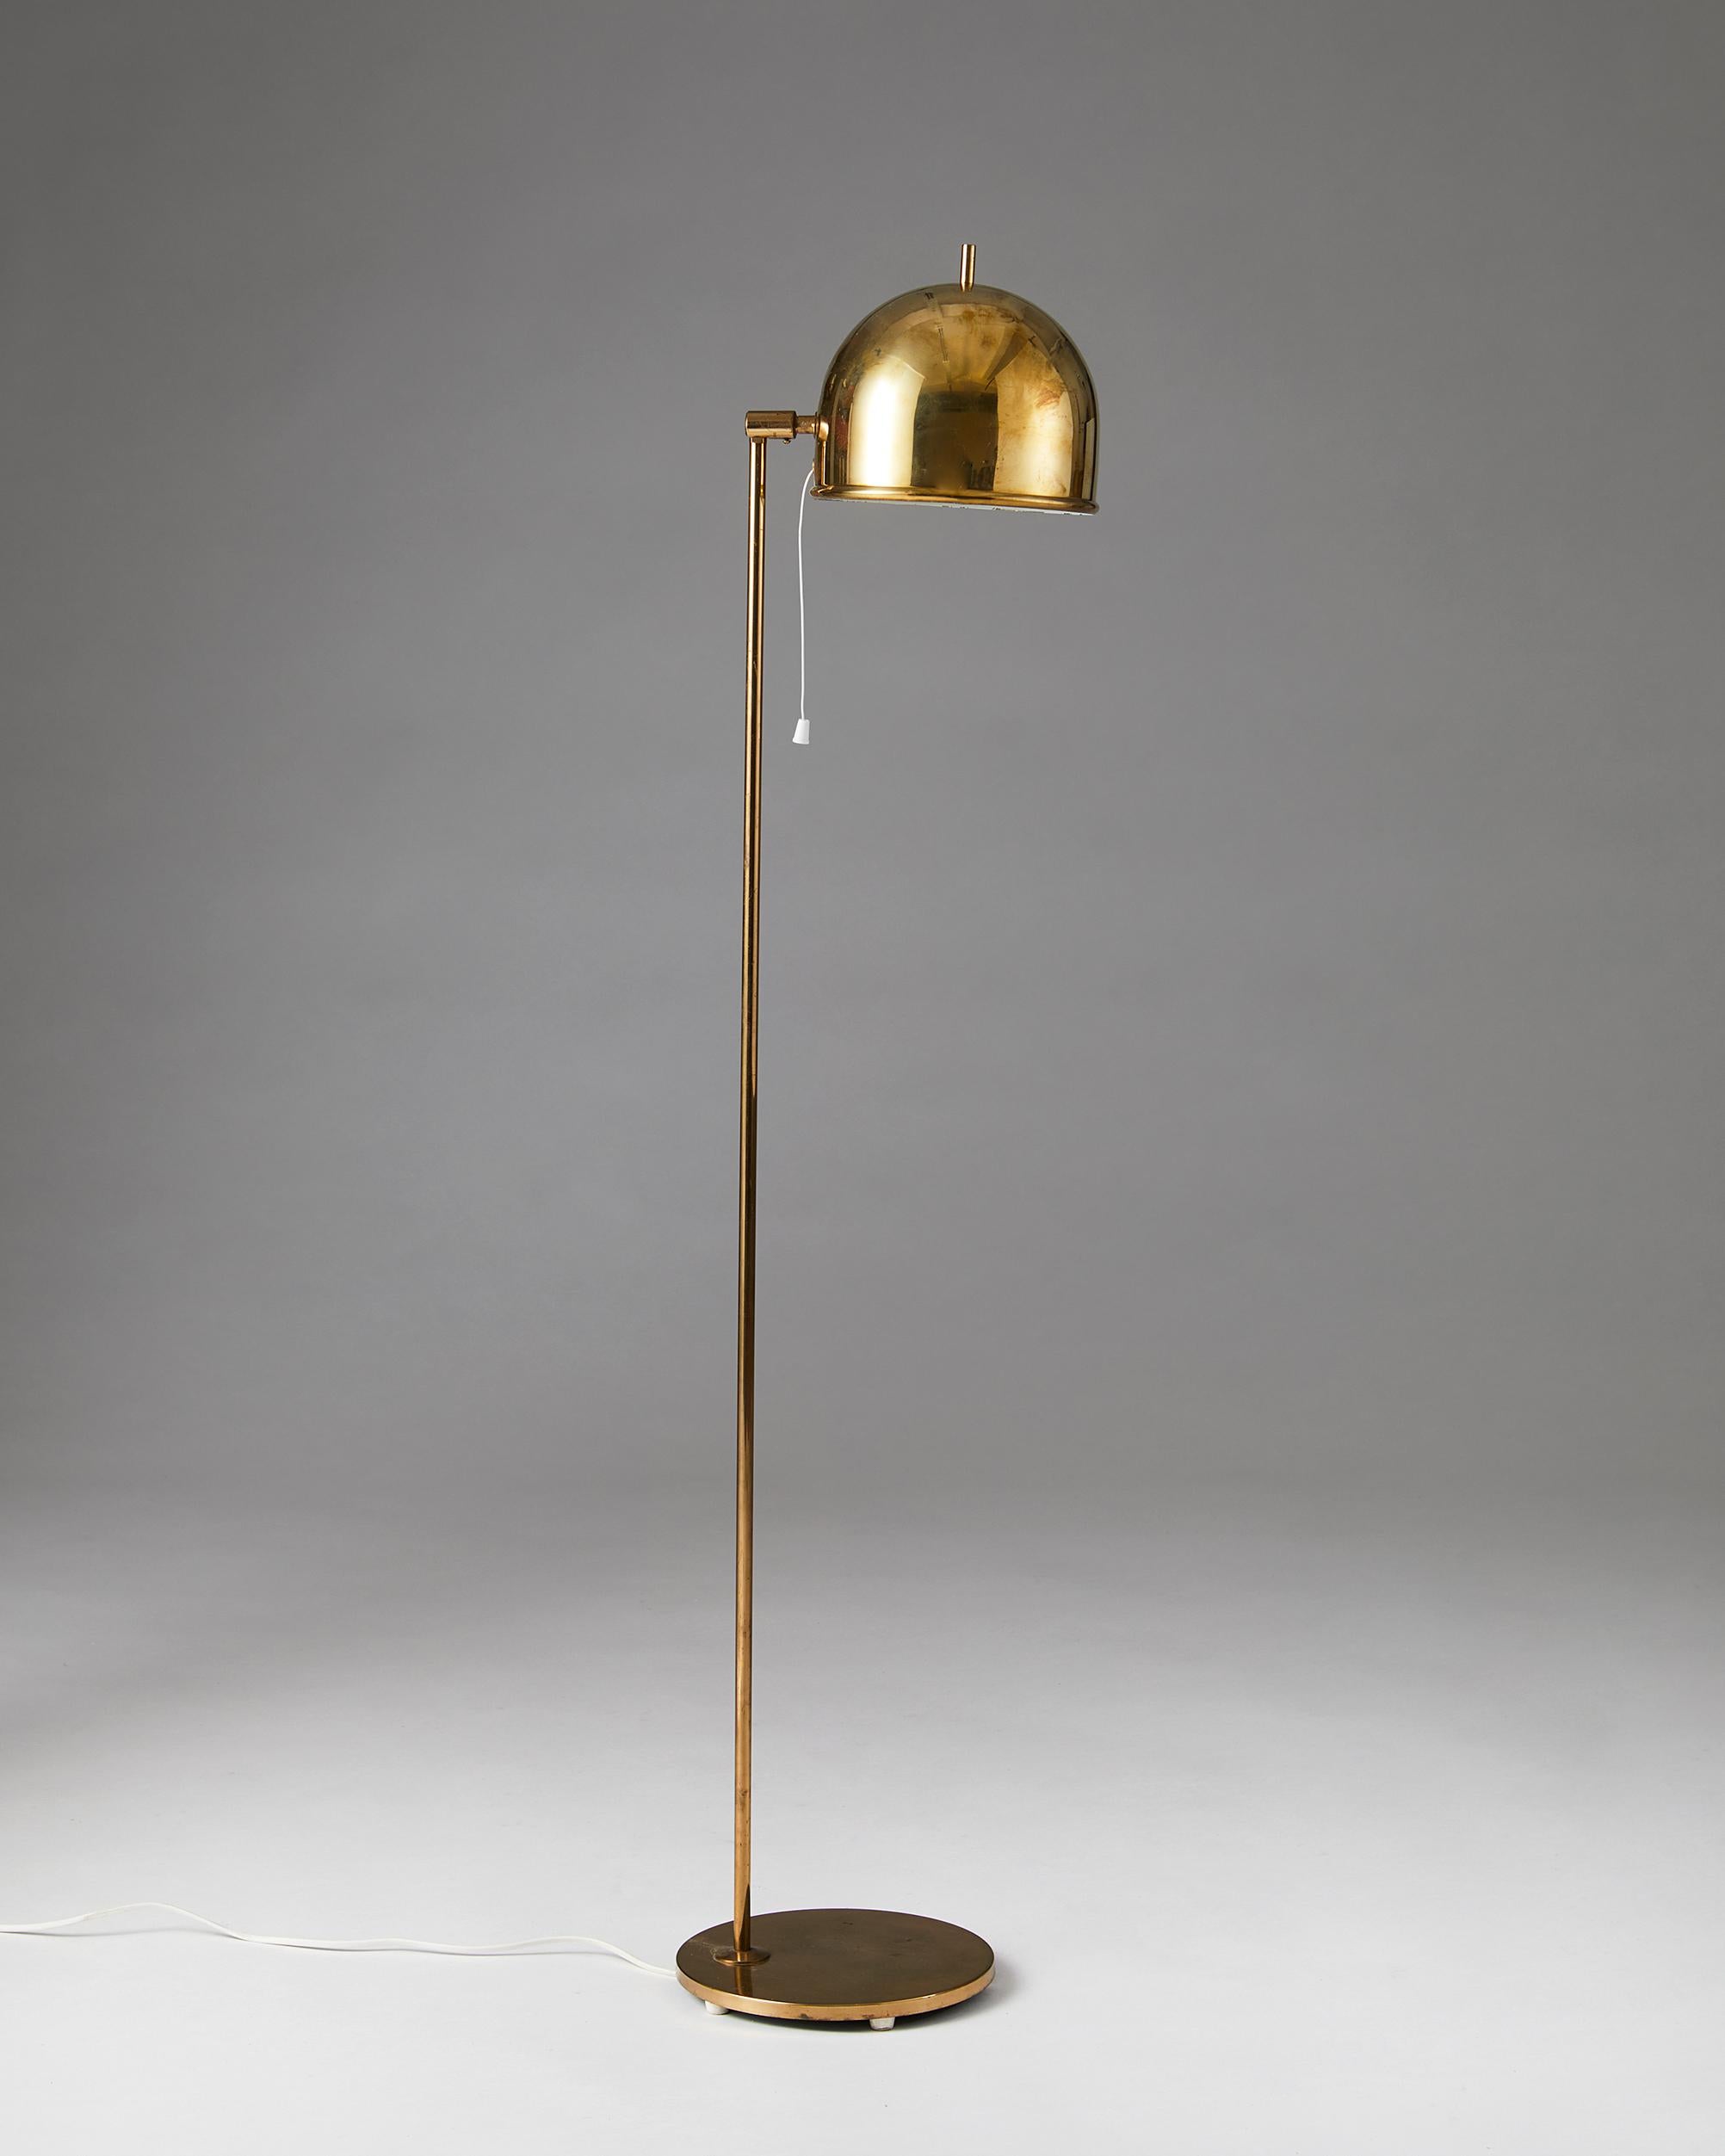 Floor lamp model G-075 designed by Eje Ahlgren for Bergboms,
Sweden. 1960s.

Brass.

This floor lamp with a fully adjustable shade was manufactured in brass by Bergboms and designed by Eje Ahlgren. The protruding brass rod at the top of the shade is